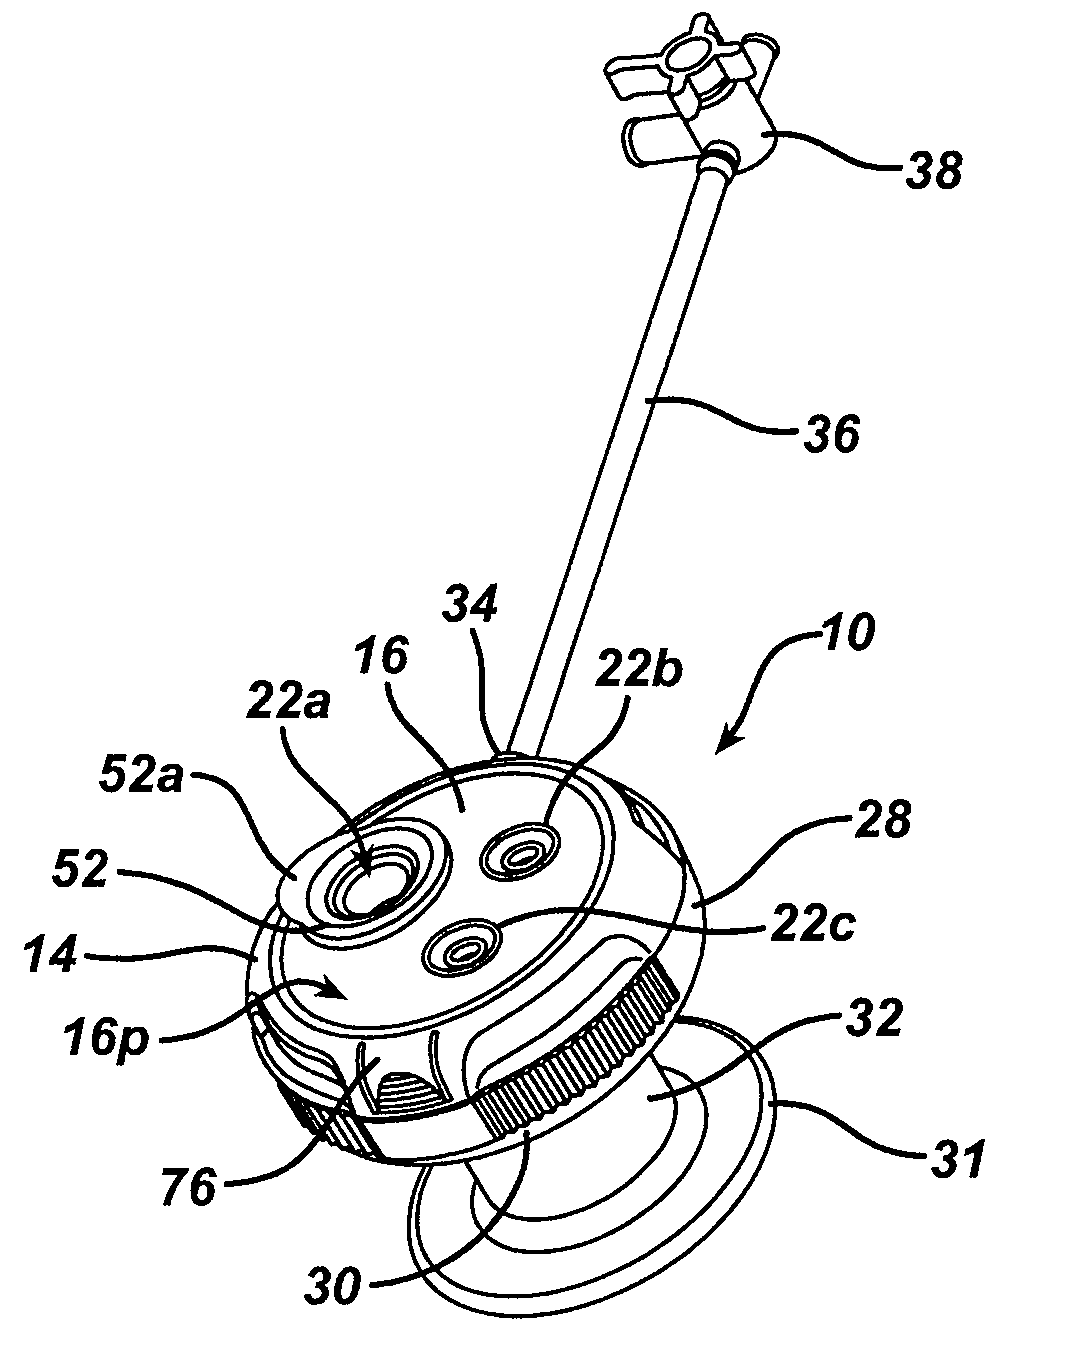 Methods and devices for providing access into a body cavity